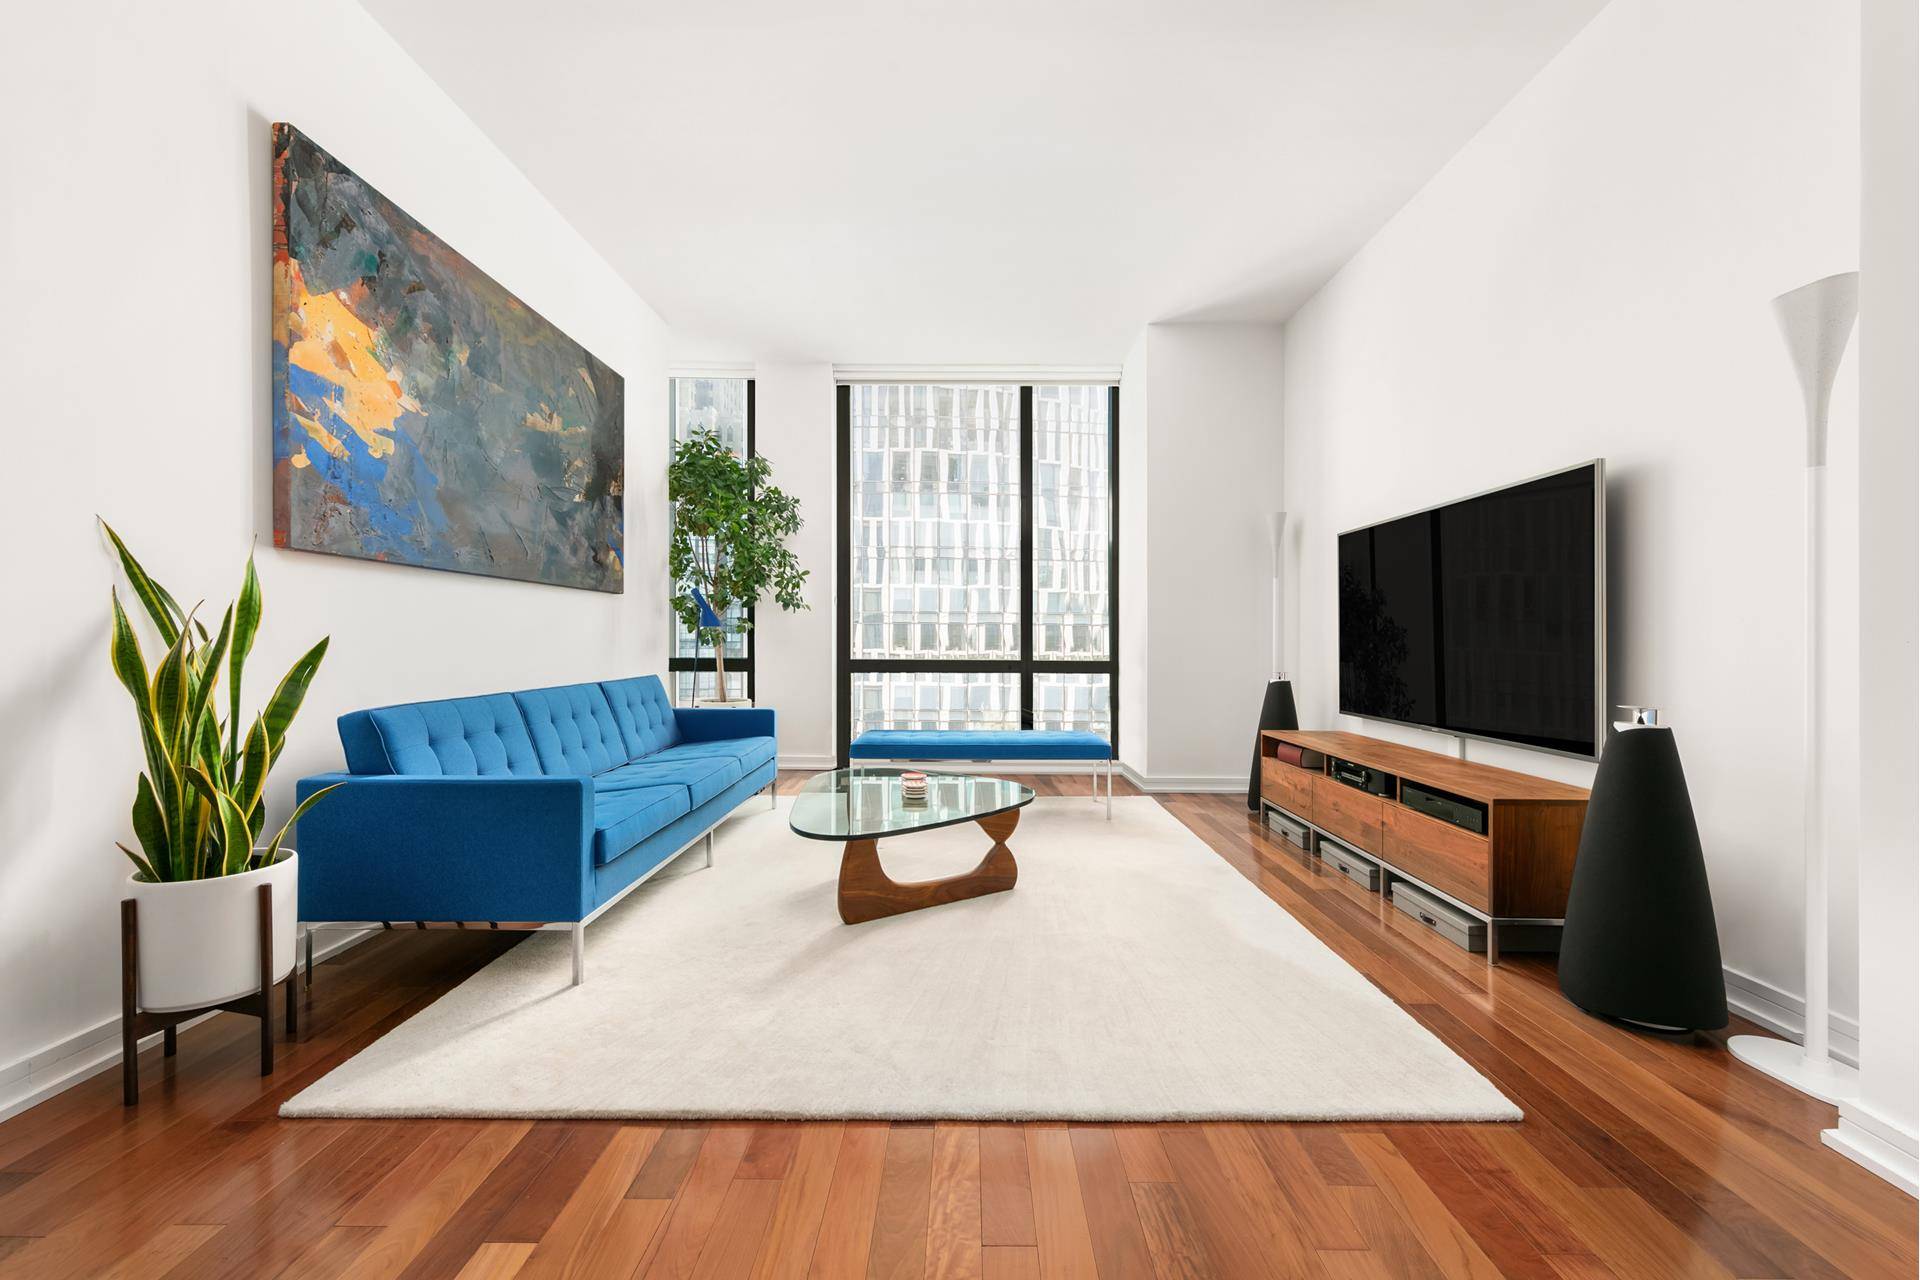 Welcome to luxurious living at its finest in this stunning two bedroom, two and one half bath residence at 101 Warren Street condominium.